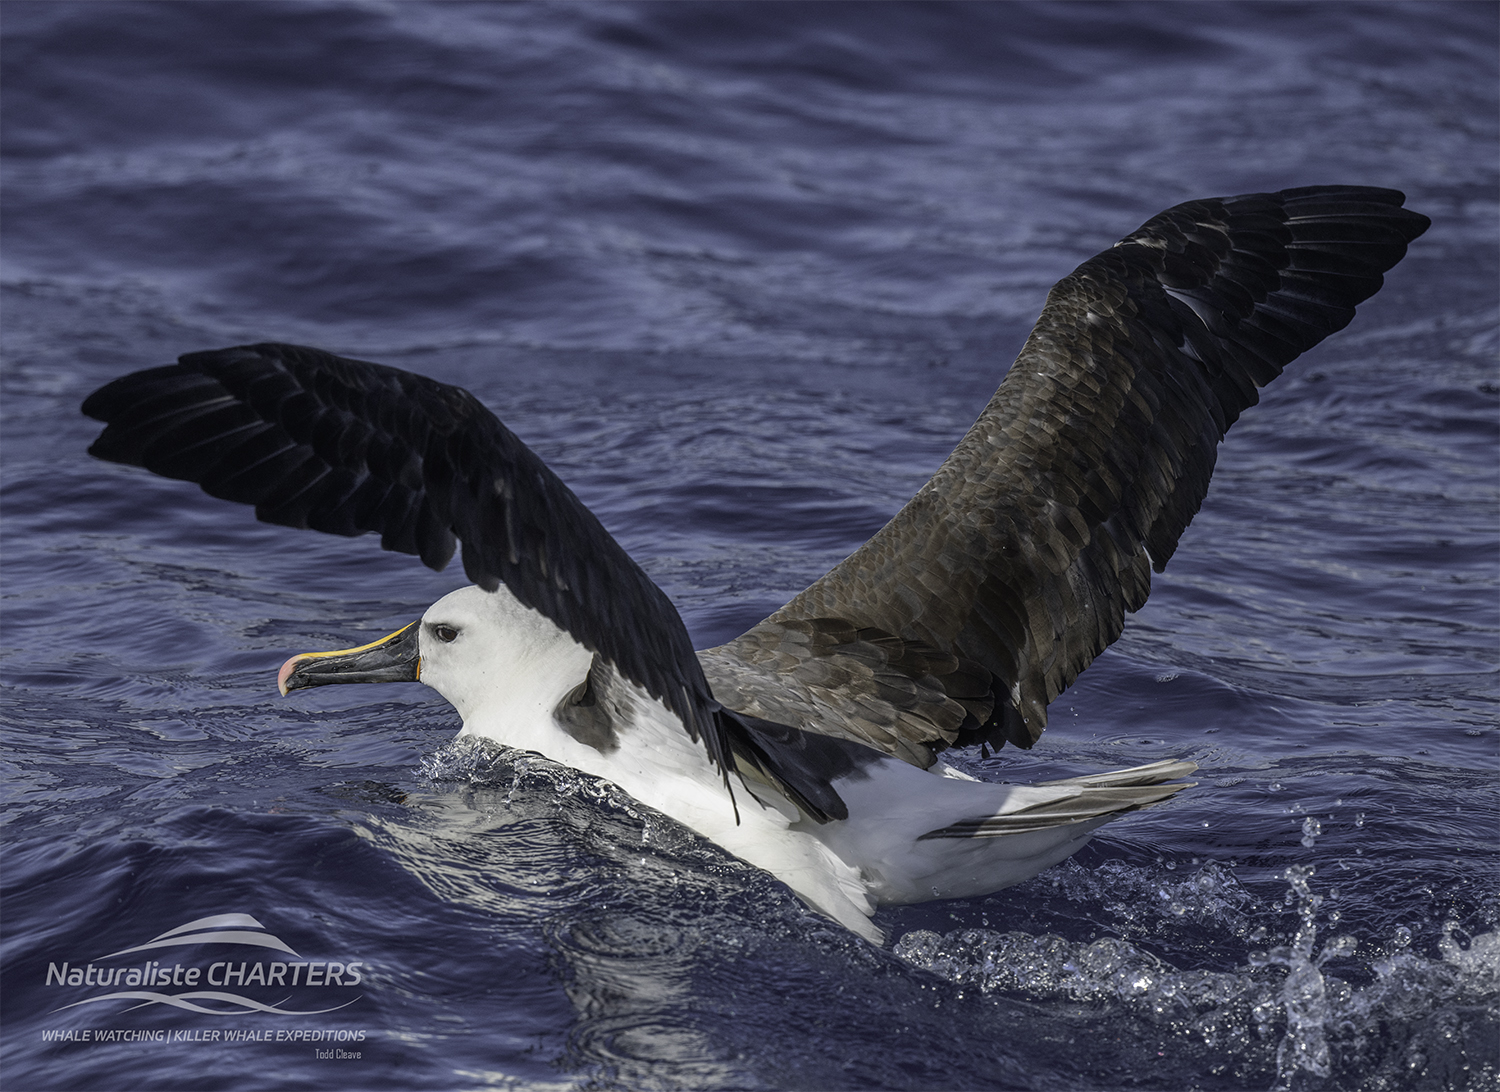 Flesh-footed Shearwaters, Australasian gannets and Terns were seen near Glasse Island